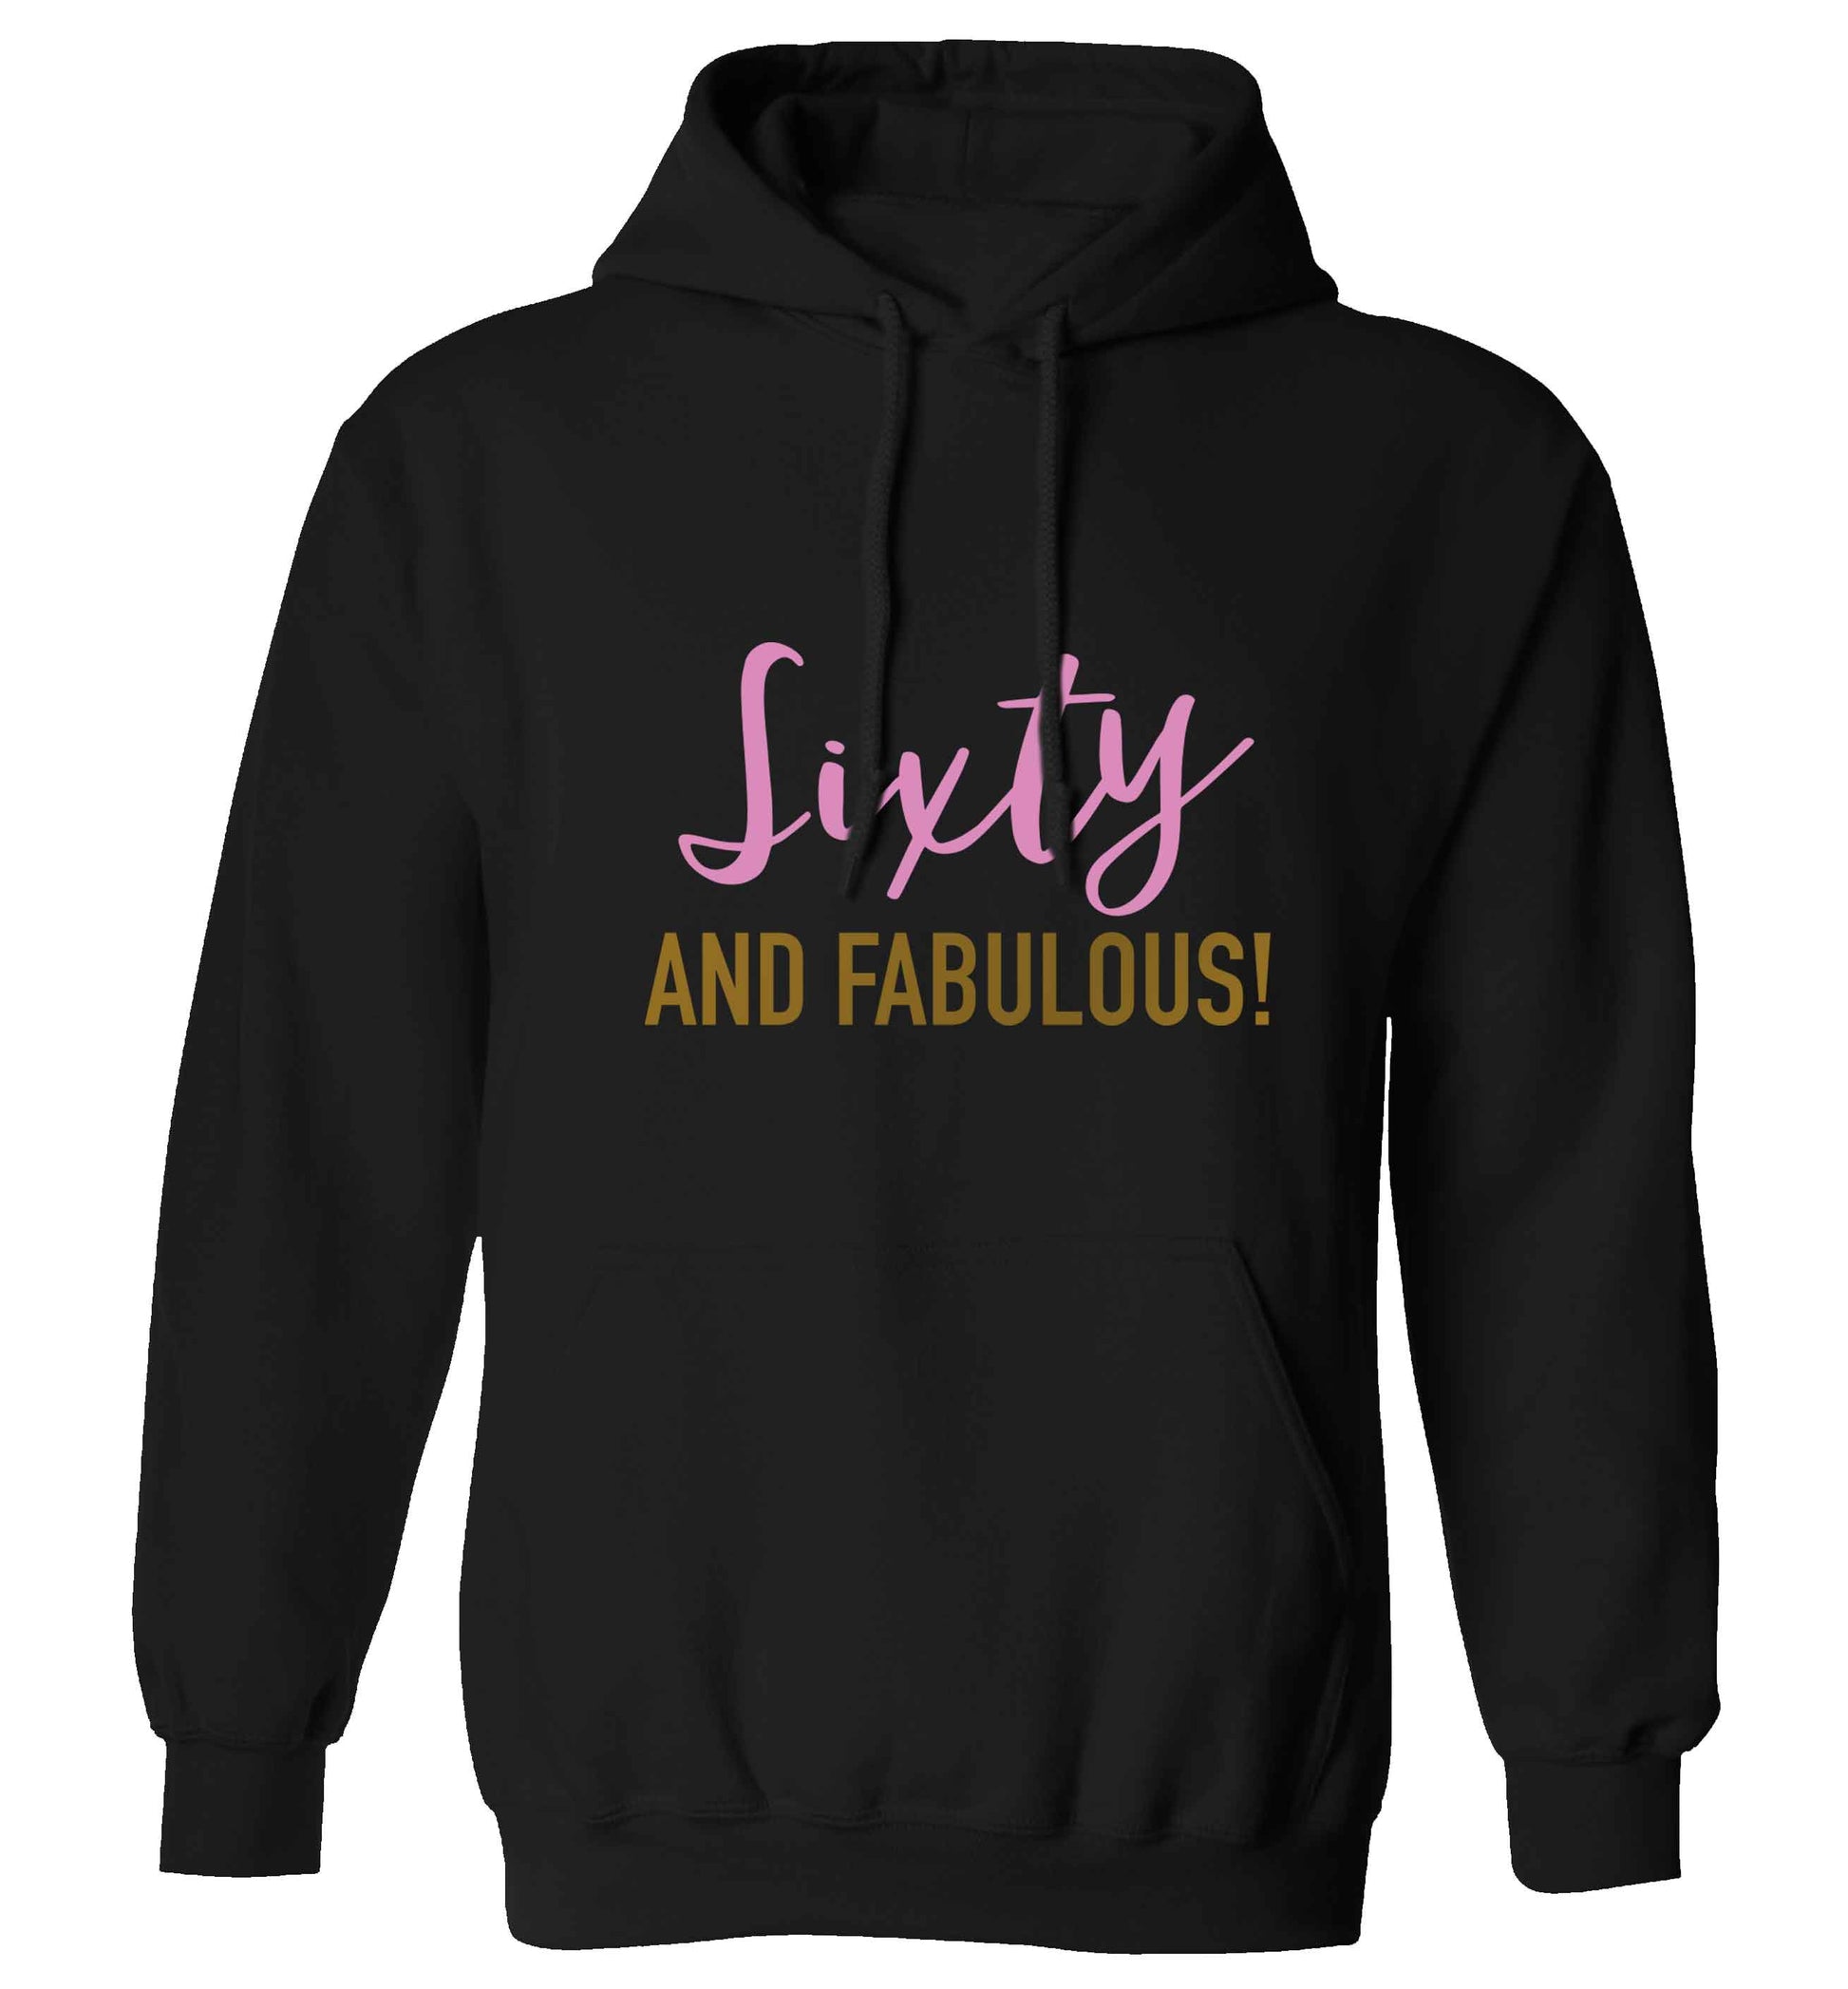 Sixty and fabulous adults unisex black hoodie 2XL